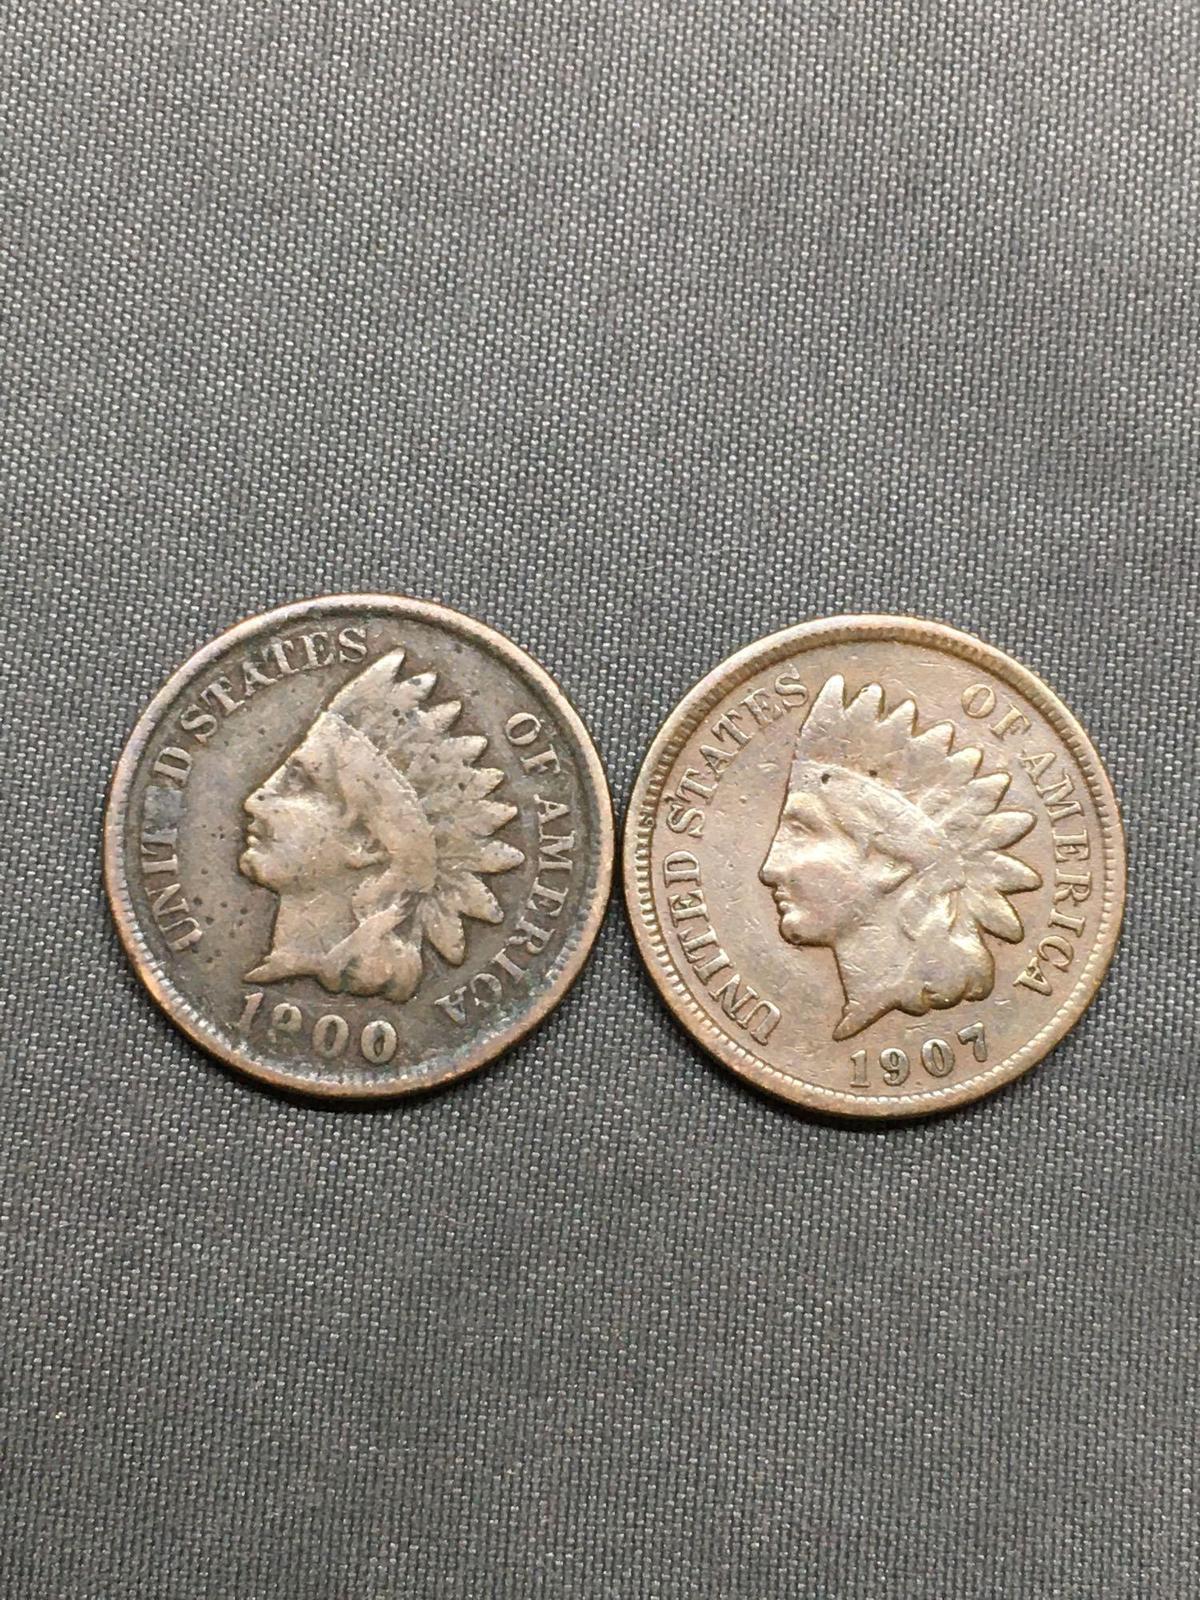 2 Count Lot of United States Indian Head Penny Cent Coins from Estate - 1900 & 1907